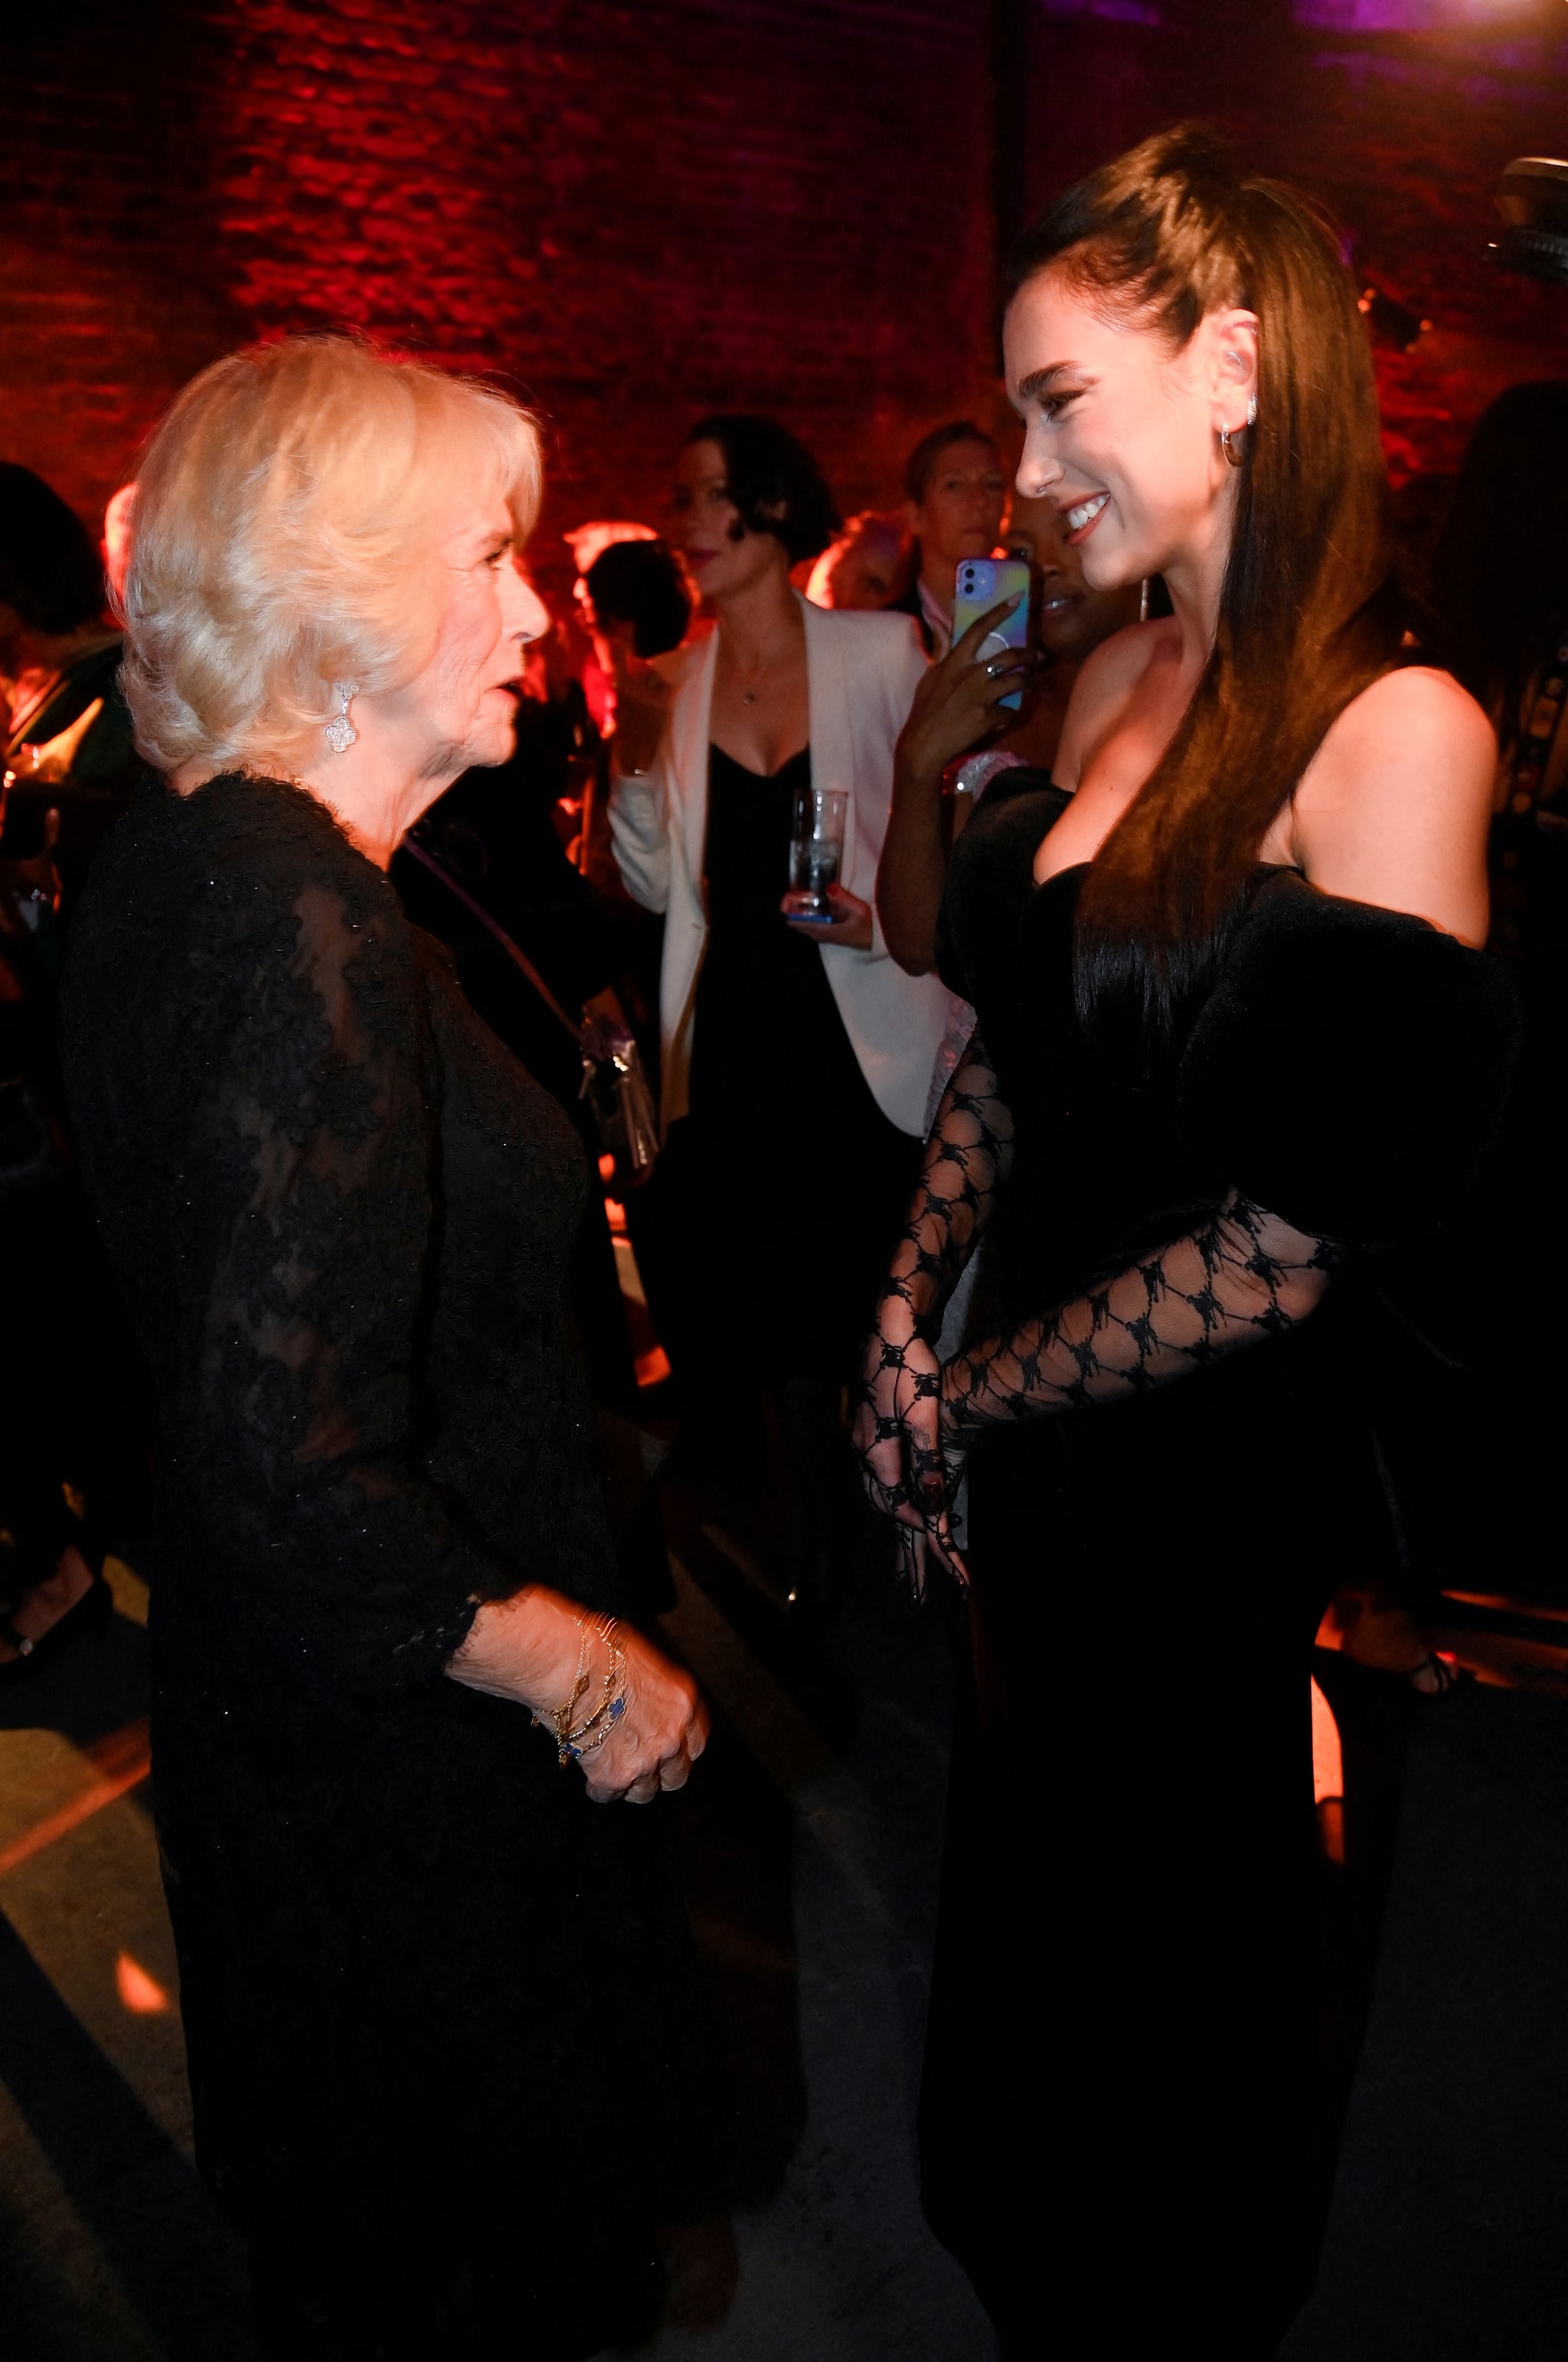 LONDON, ENGLAND - OCTOBER 17: Camilla, Queen Consort meets singer Dua Lipa at the 2022 Booker Prize for Fiction ceremony at the Roundhouse, on October 17, 2022, in London, England. (Photo by Toby Melville - WPA Pool/Getty Images)